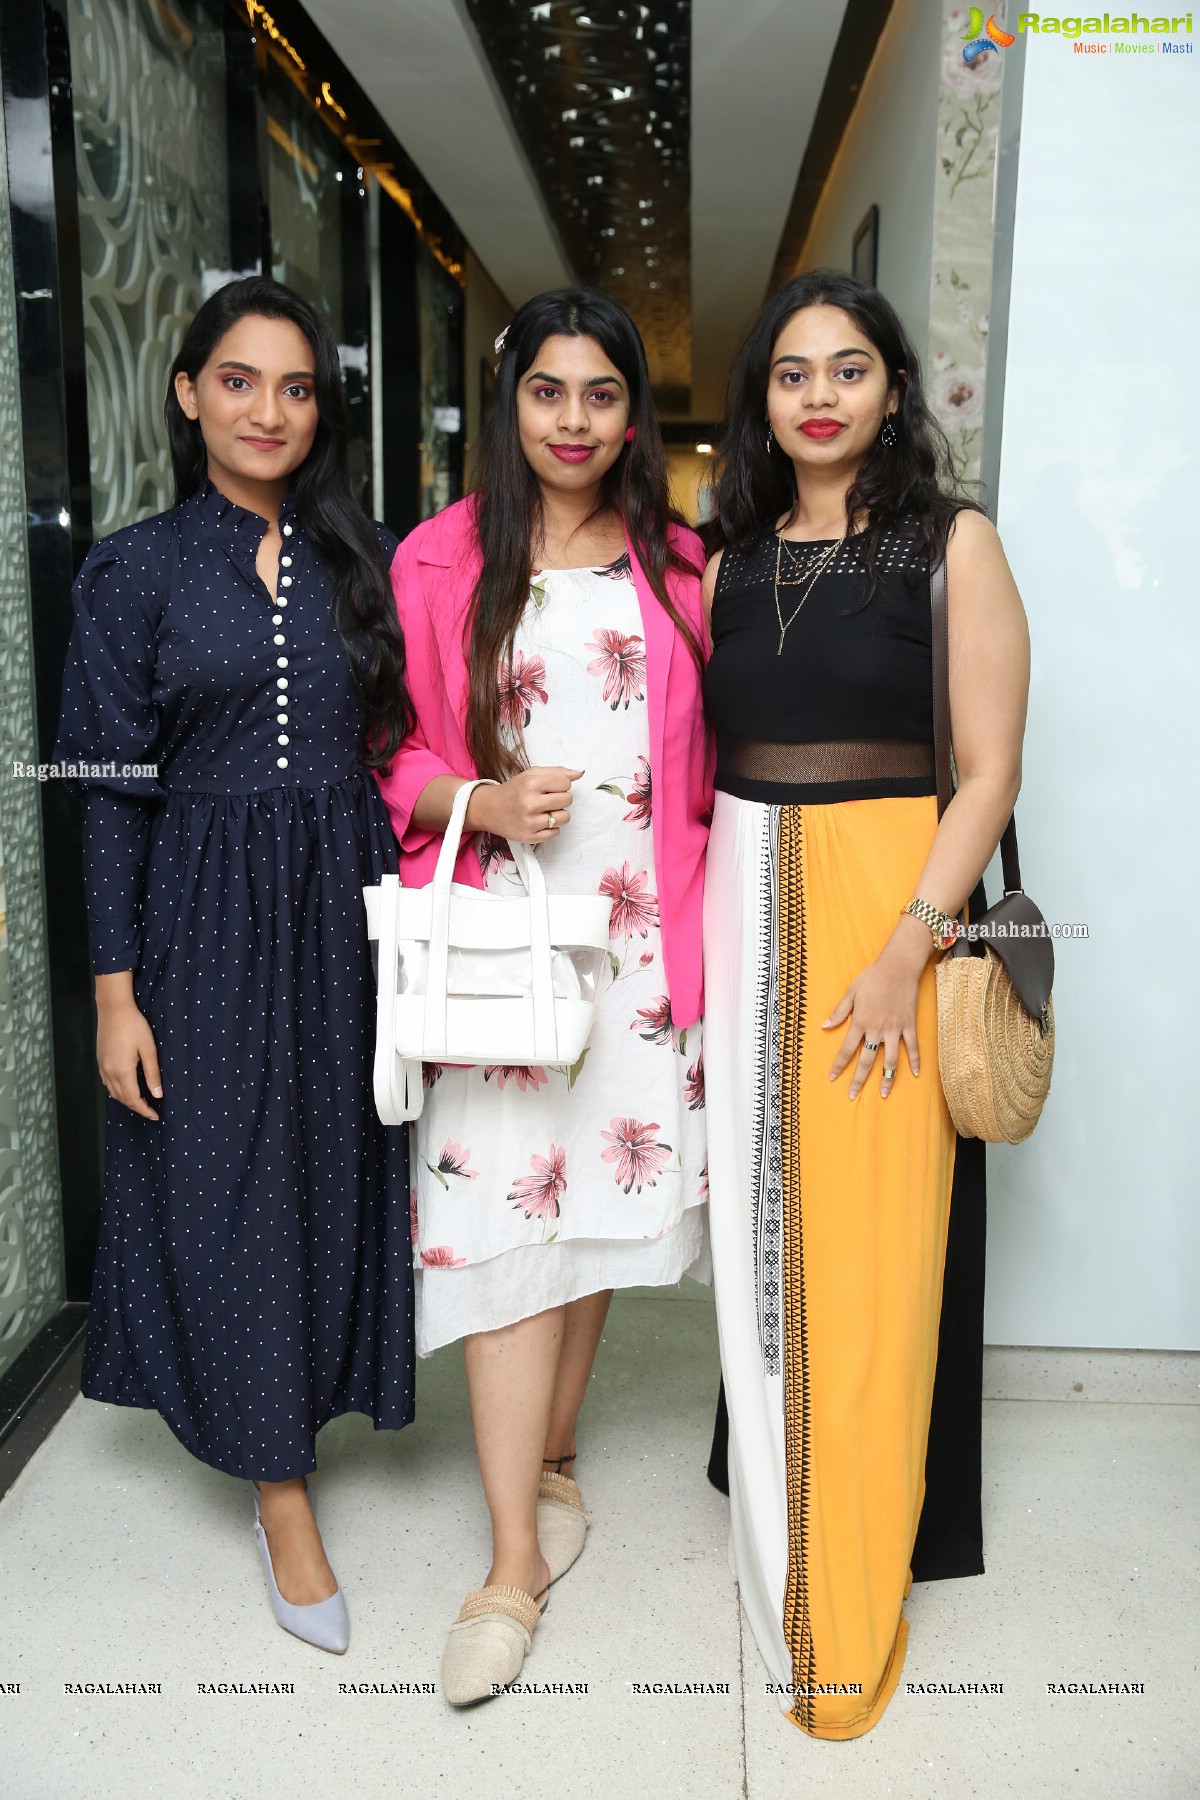 Celebrity Secrets Introduces ‘Summer Special’ at Madhapur